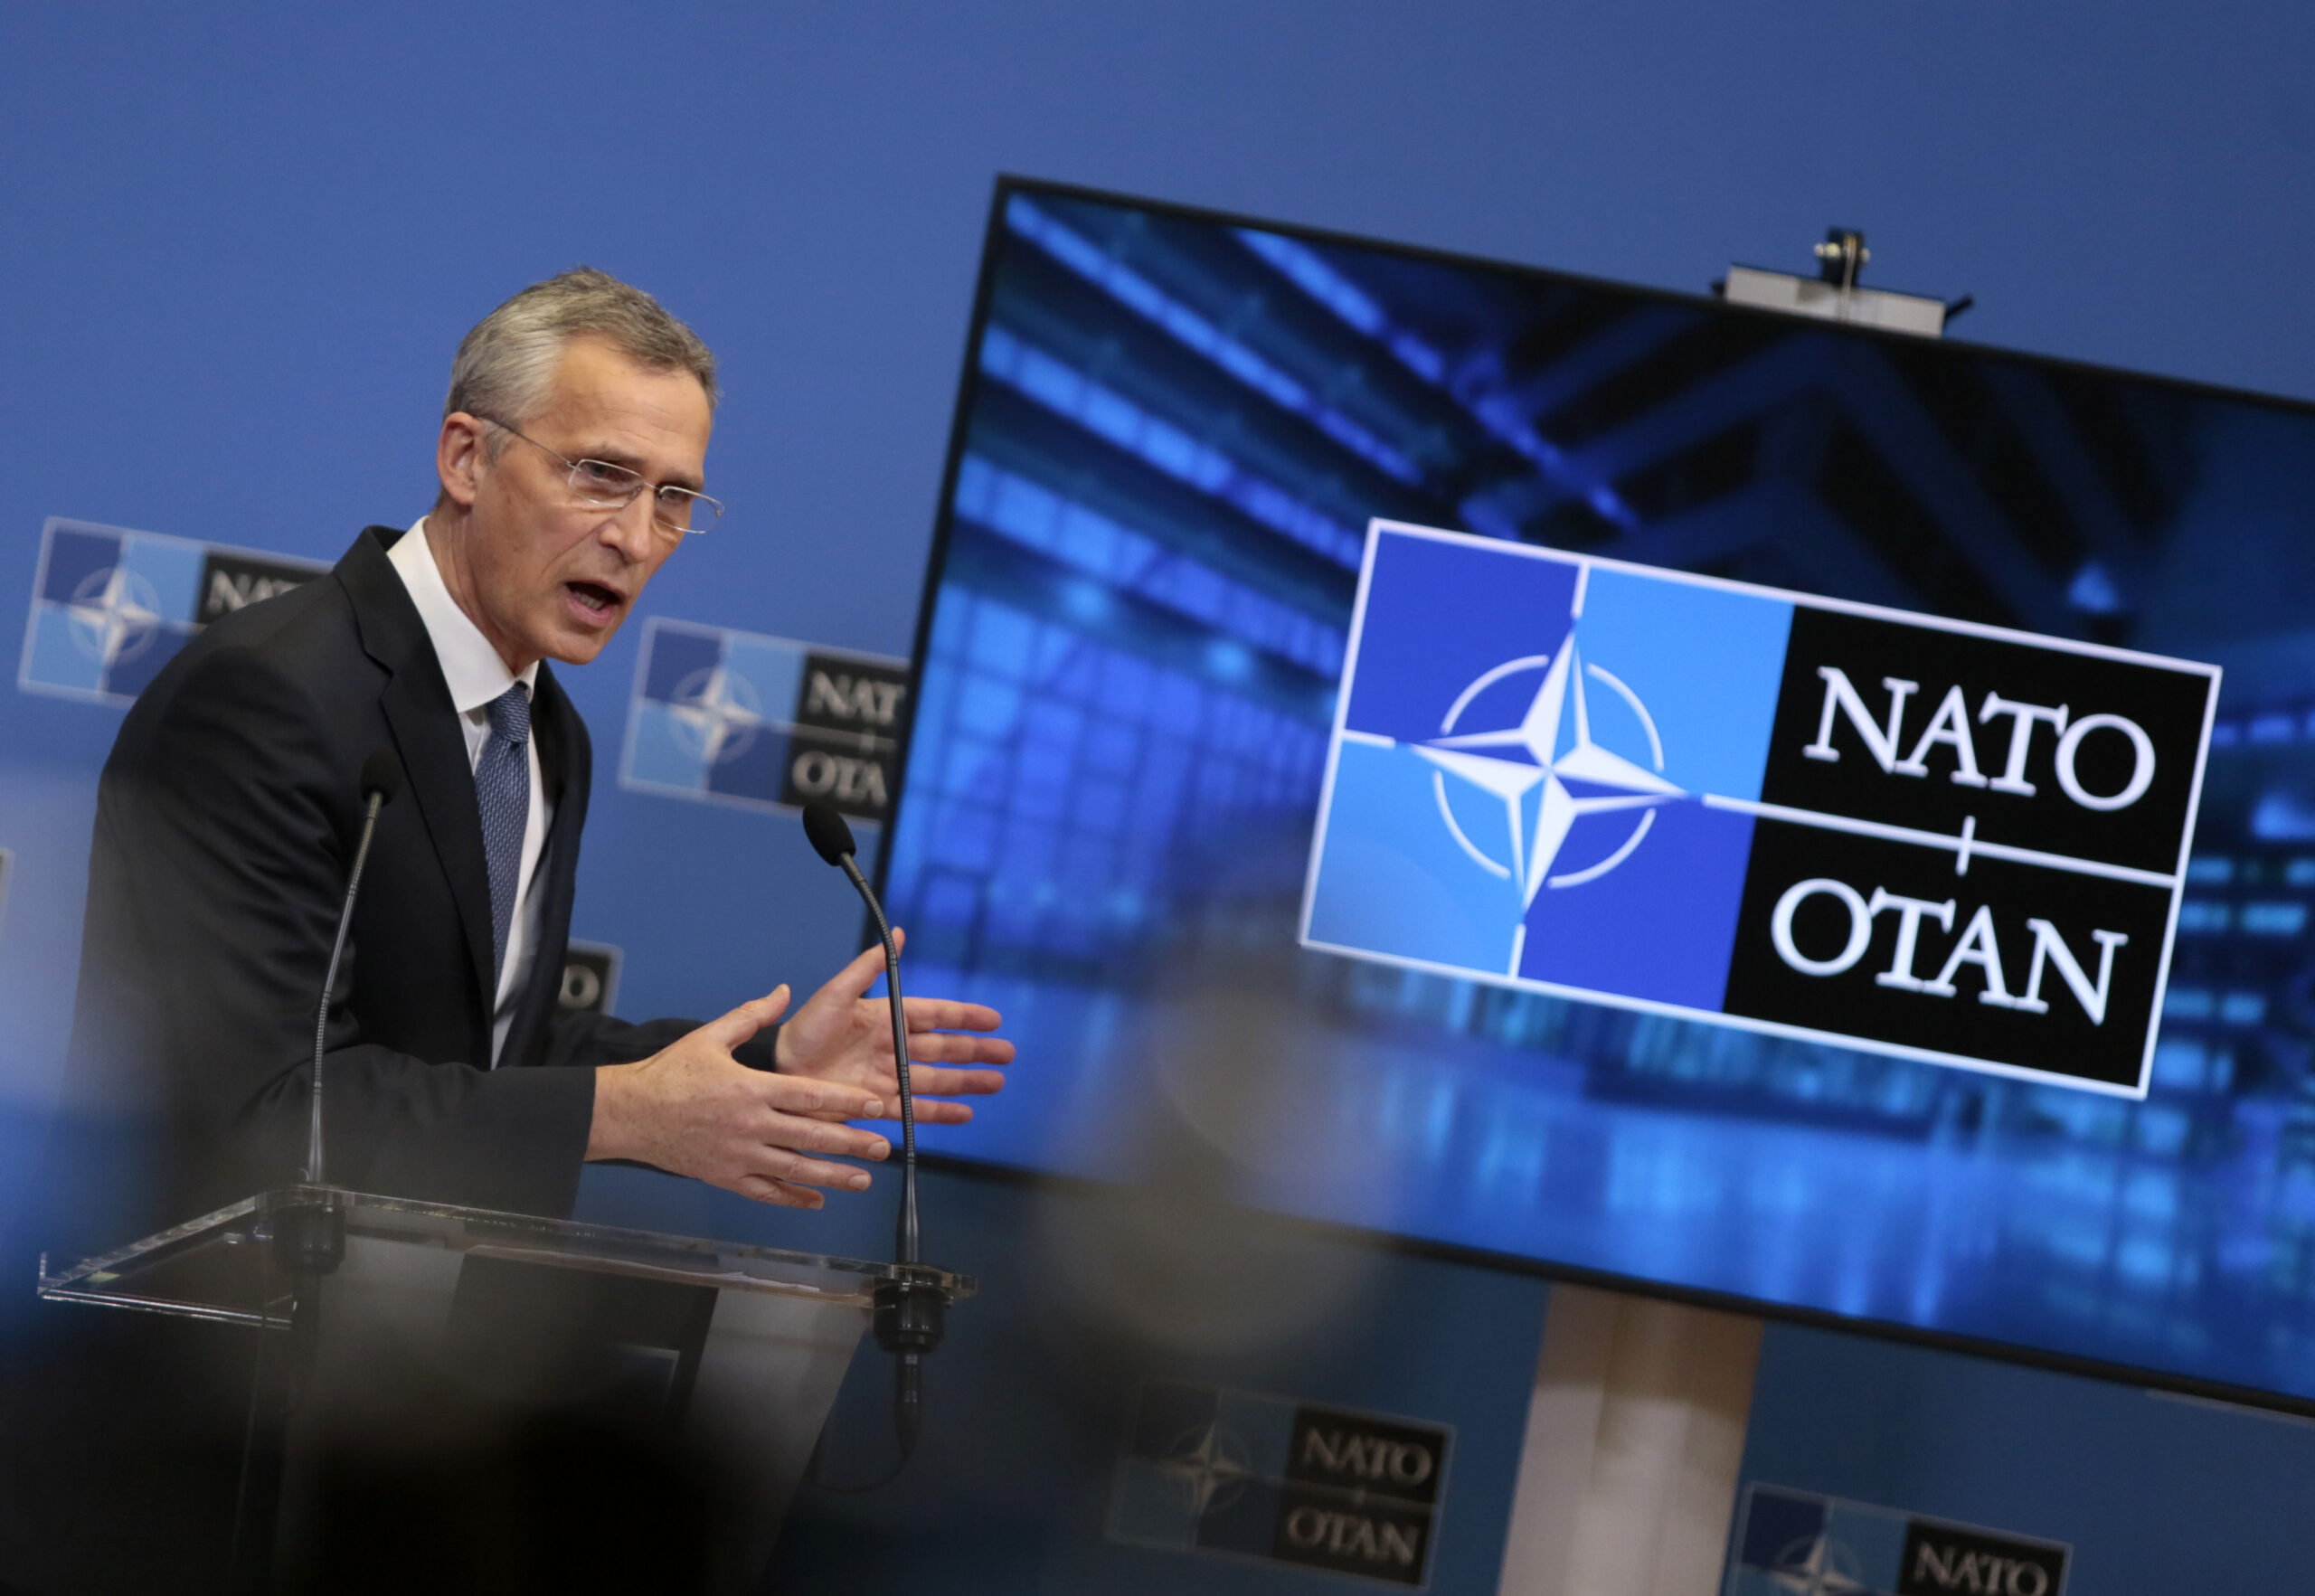 NATO Secretary General Jens Stoltenberg speaks during a media conference after a meeting of NATO foreign ministers at NATO headquarters in Brussels, Wednesday, March 24, 2021. (AP Photo/Virginia Mayo, Pool)